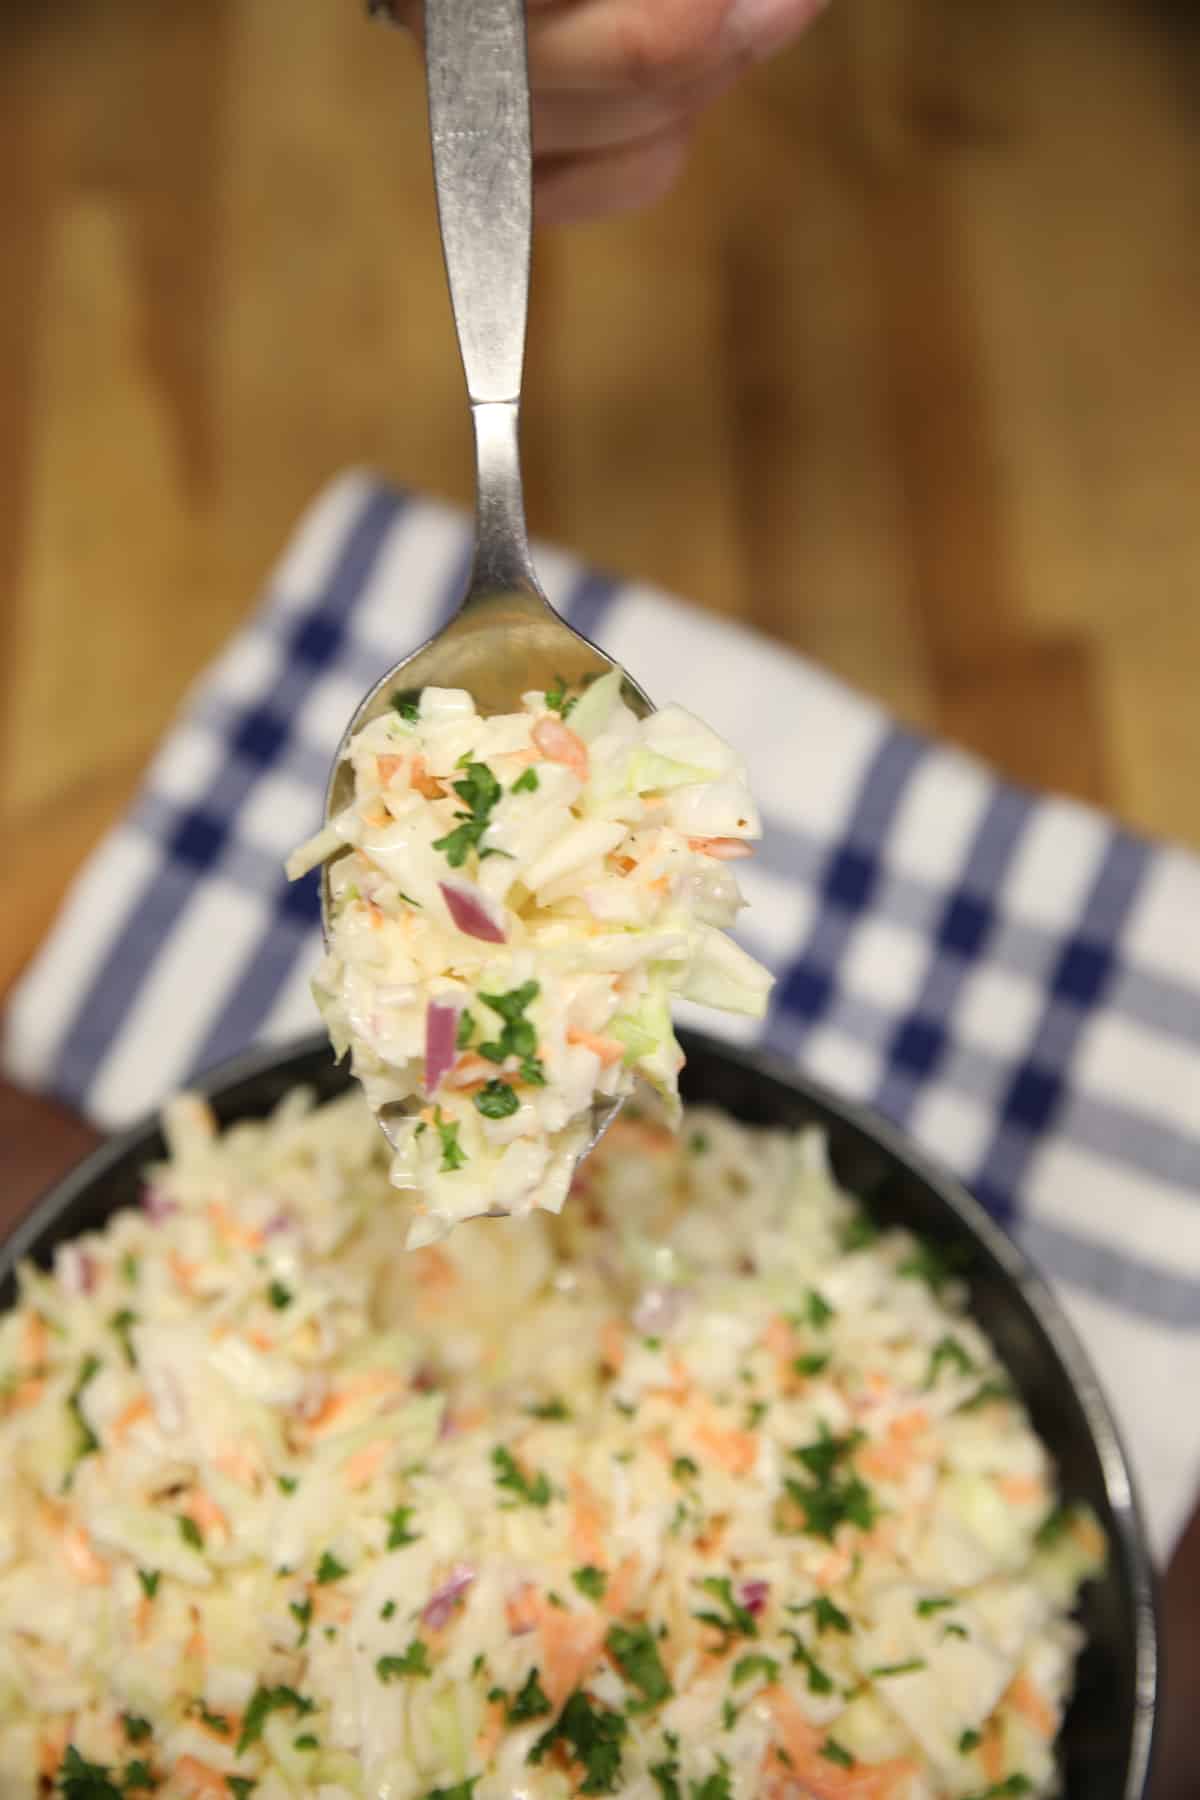 Spoonful of red onion slaw.